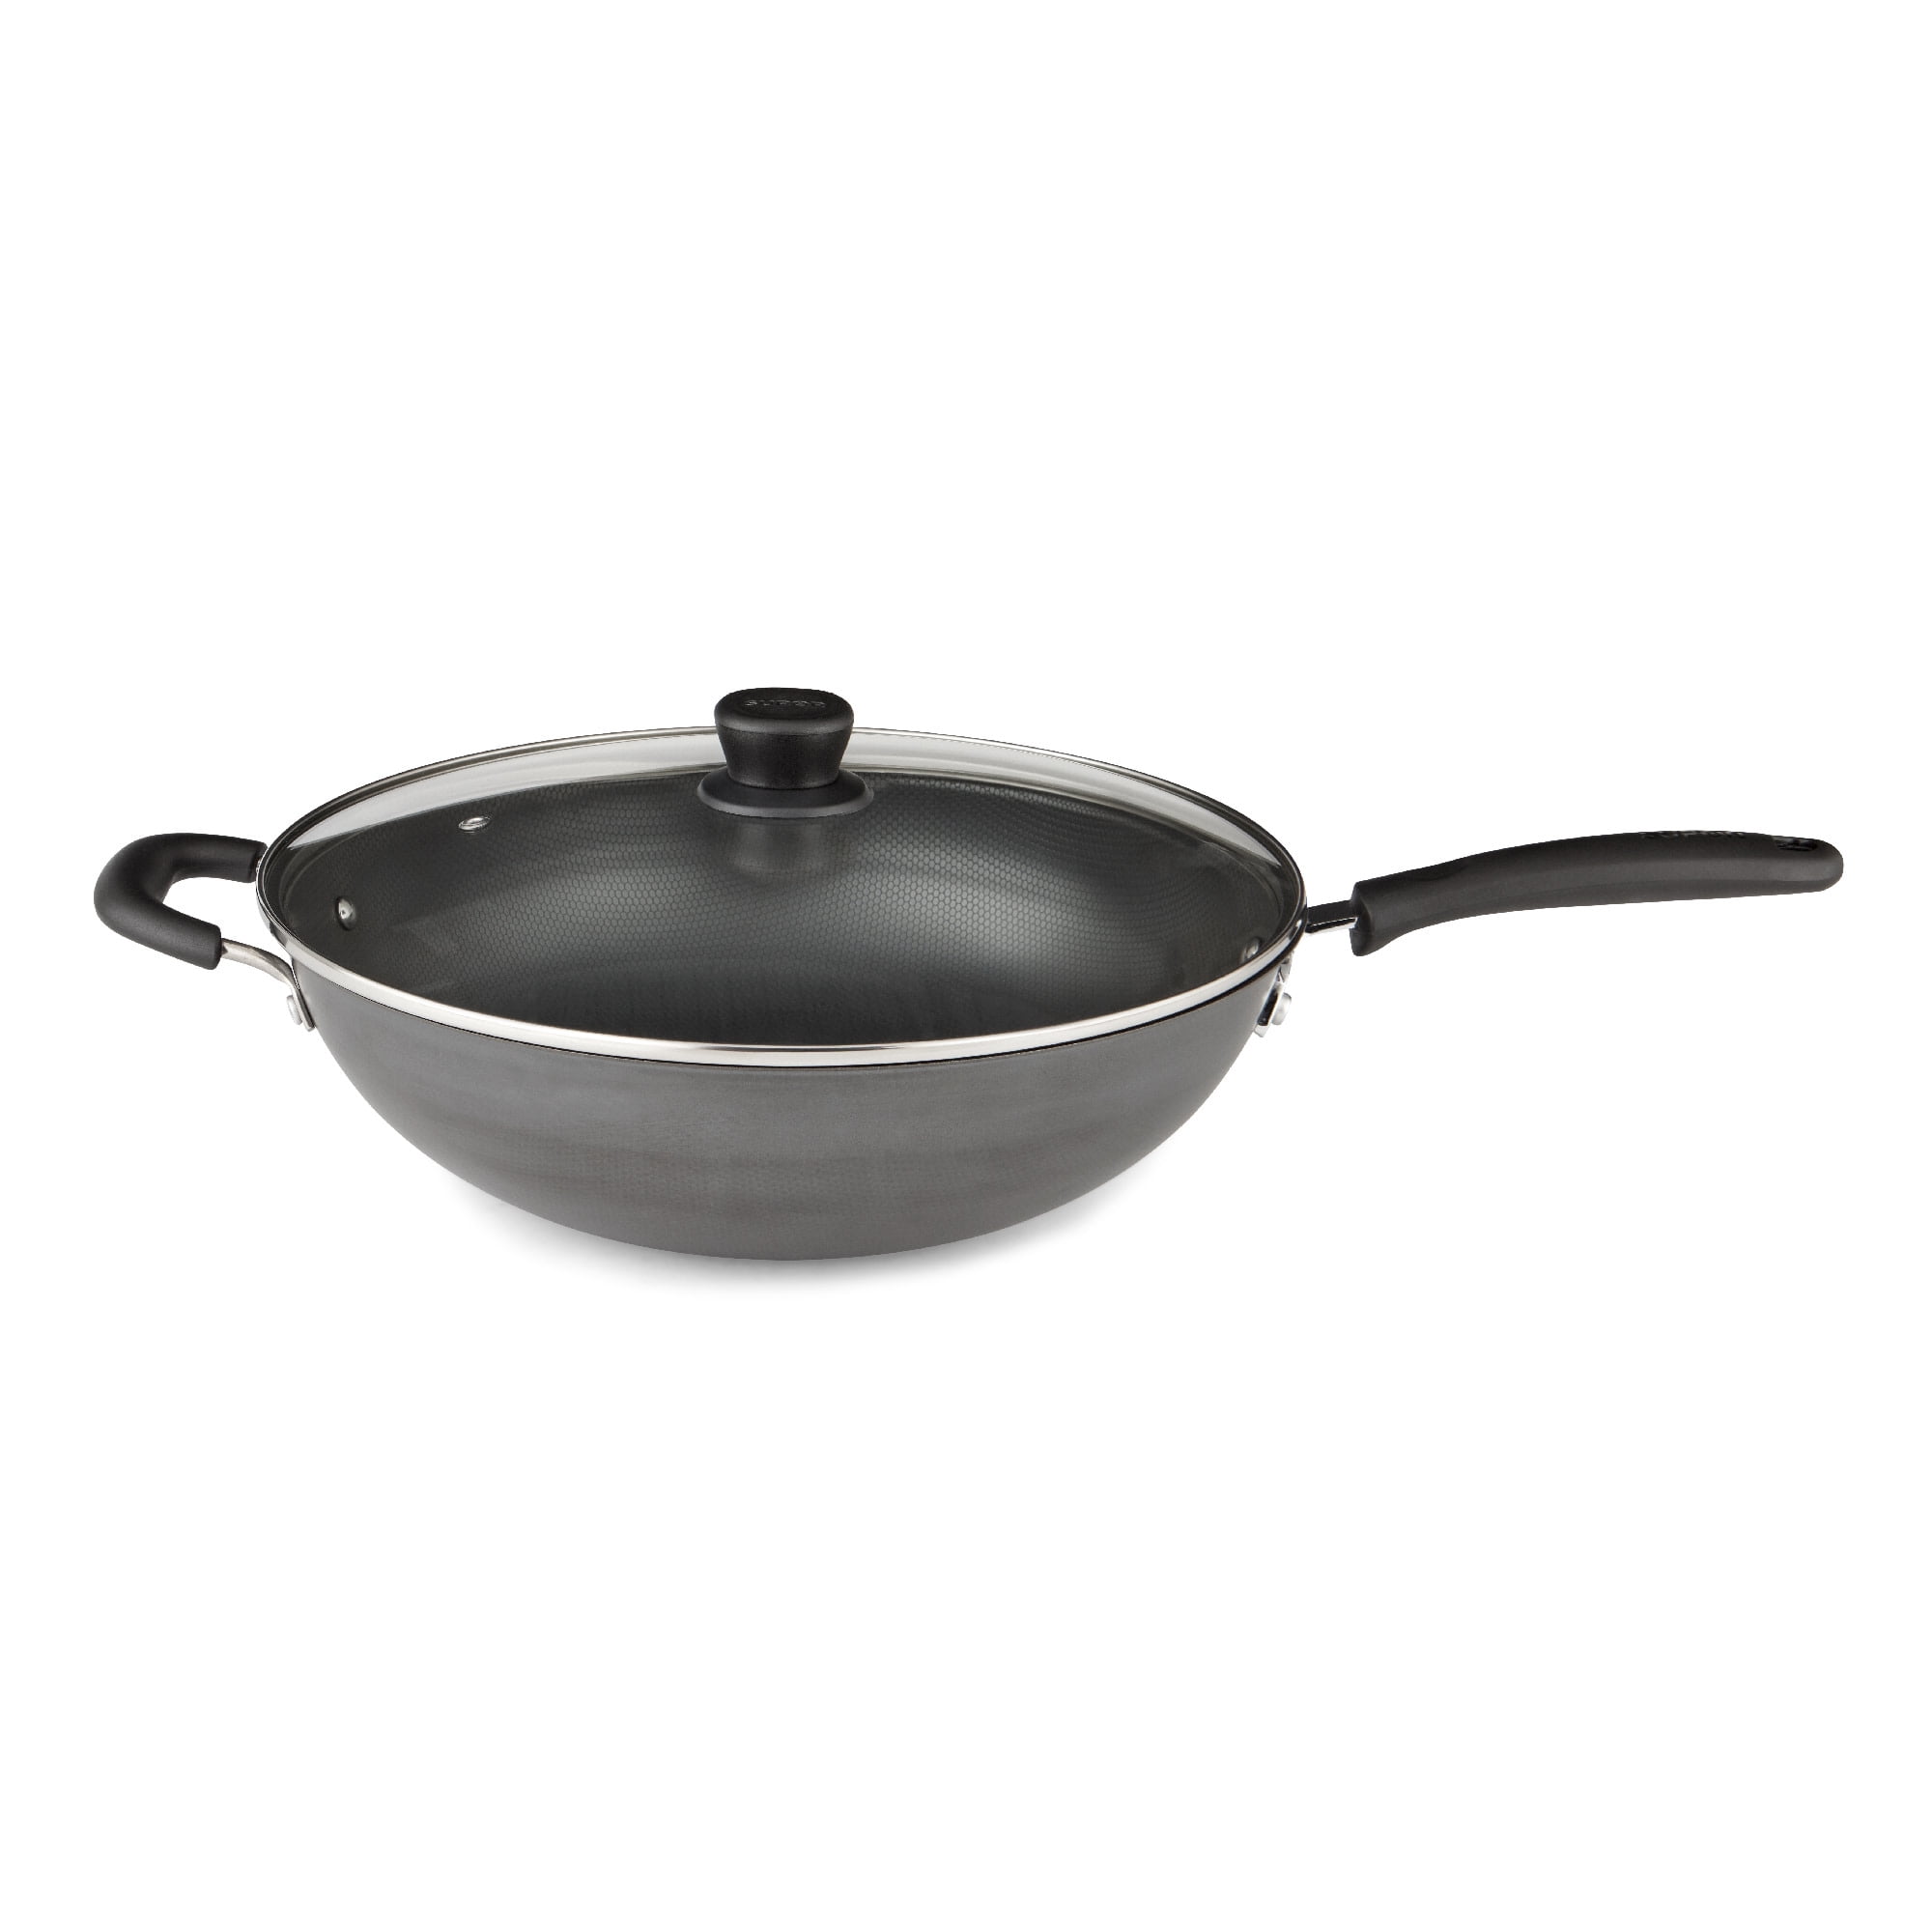 28 Cm Black Aluminium Round Frying Pan Non Stick Insulated Handle With Lid 